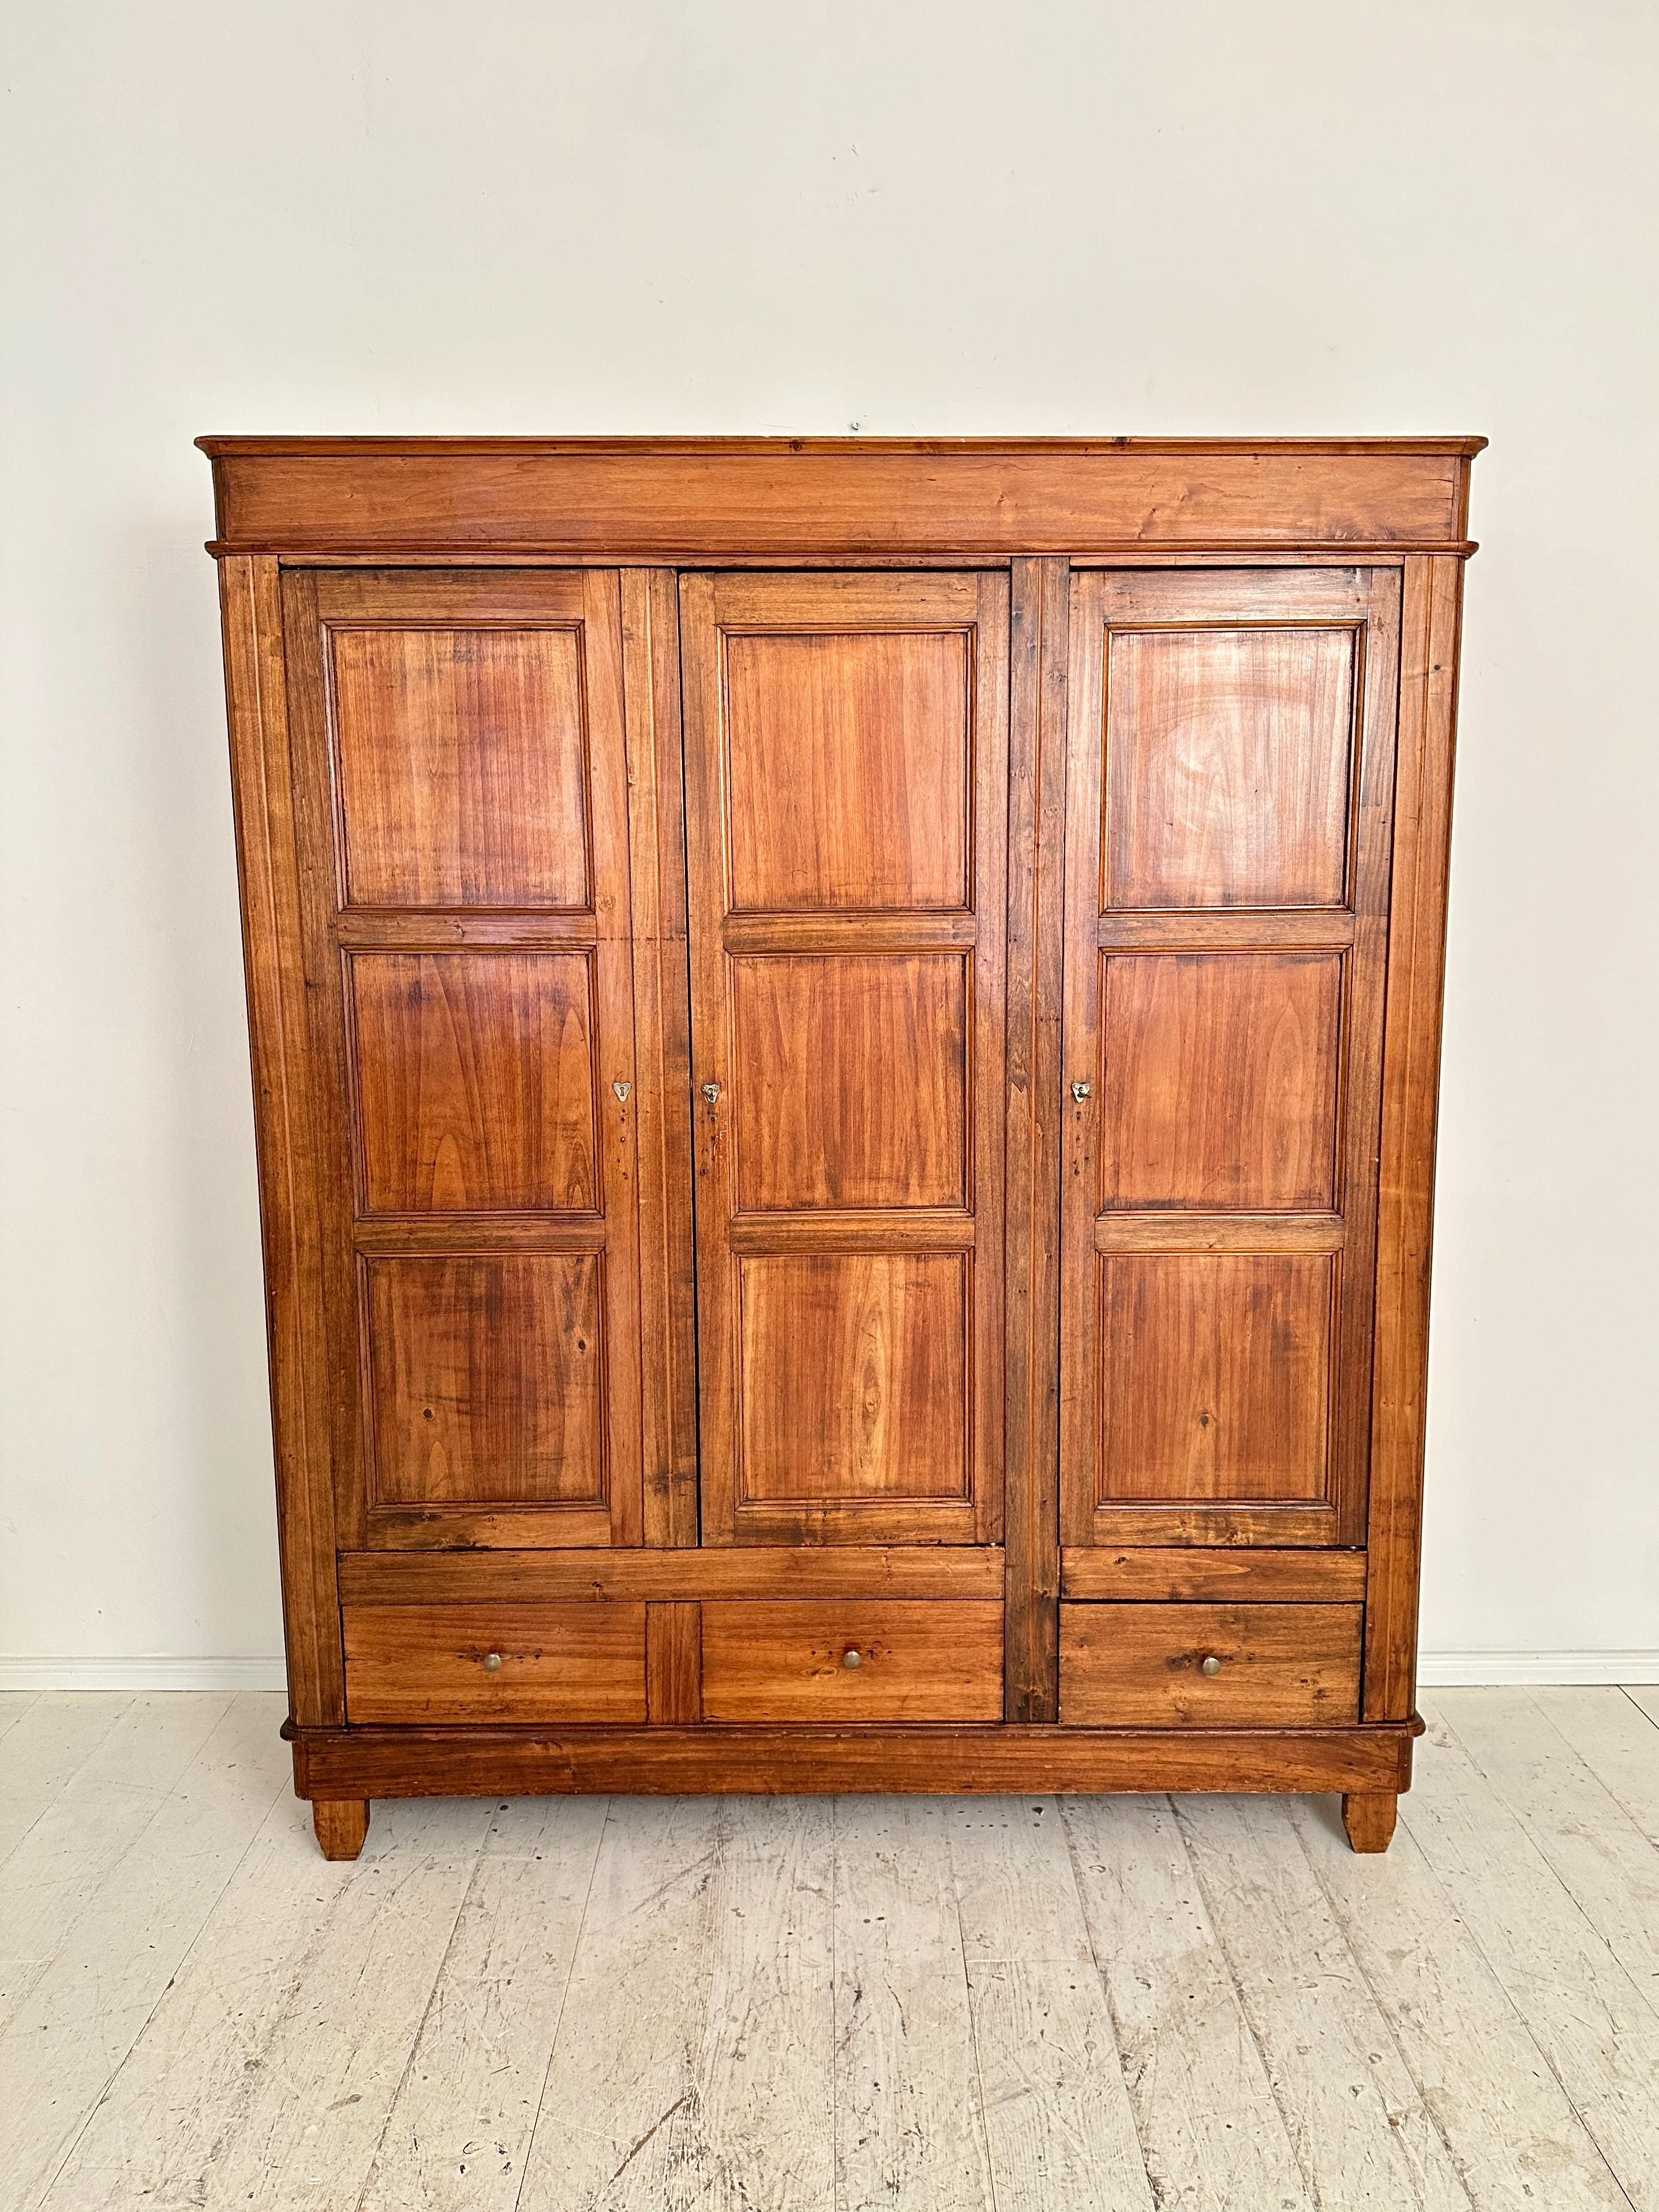 This exquisite Italian Art Deco cupboard, crafted around 1920, stands as a testament to timeless elegance and masterful craftsmanship. Fashioned from rich brown wood, it exudes warmth and sophistication. 
The meticulous design features three doors